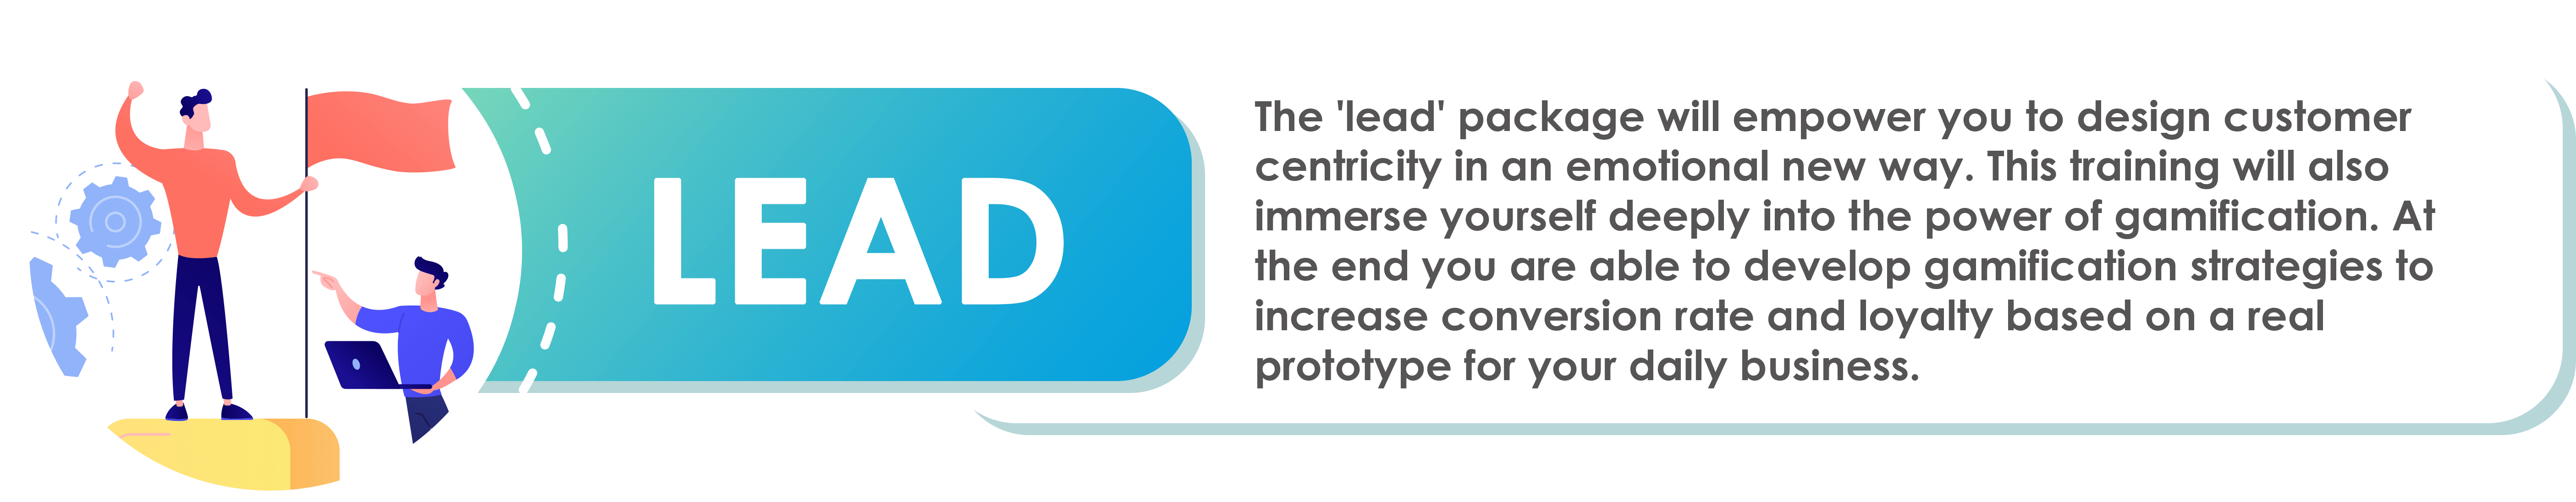 Gamification - Lead